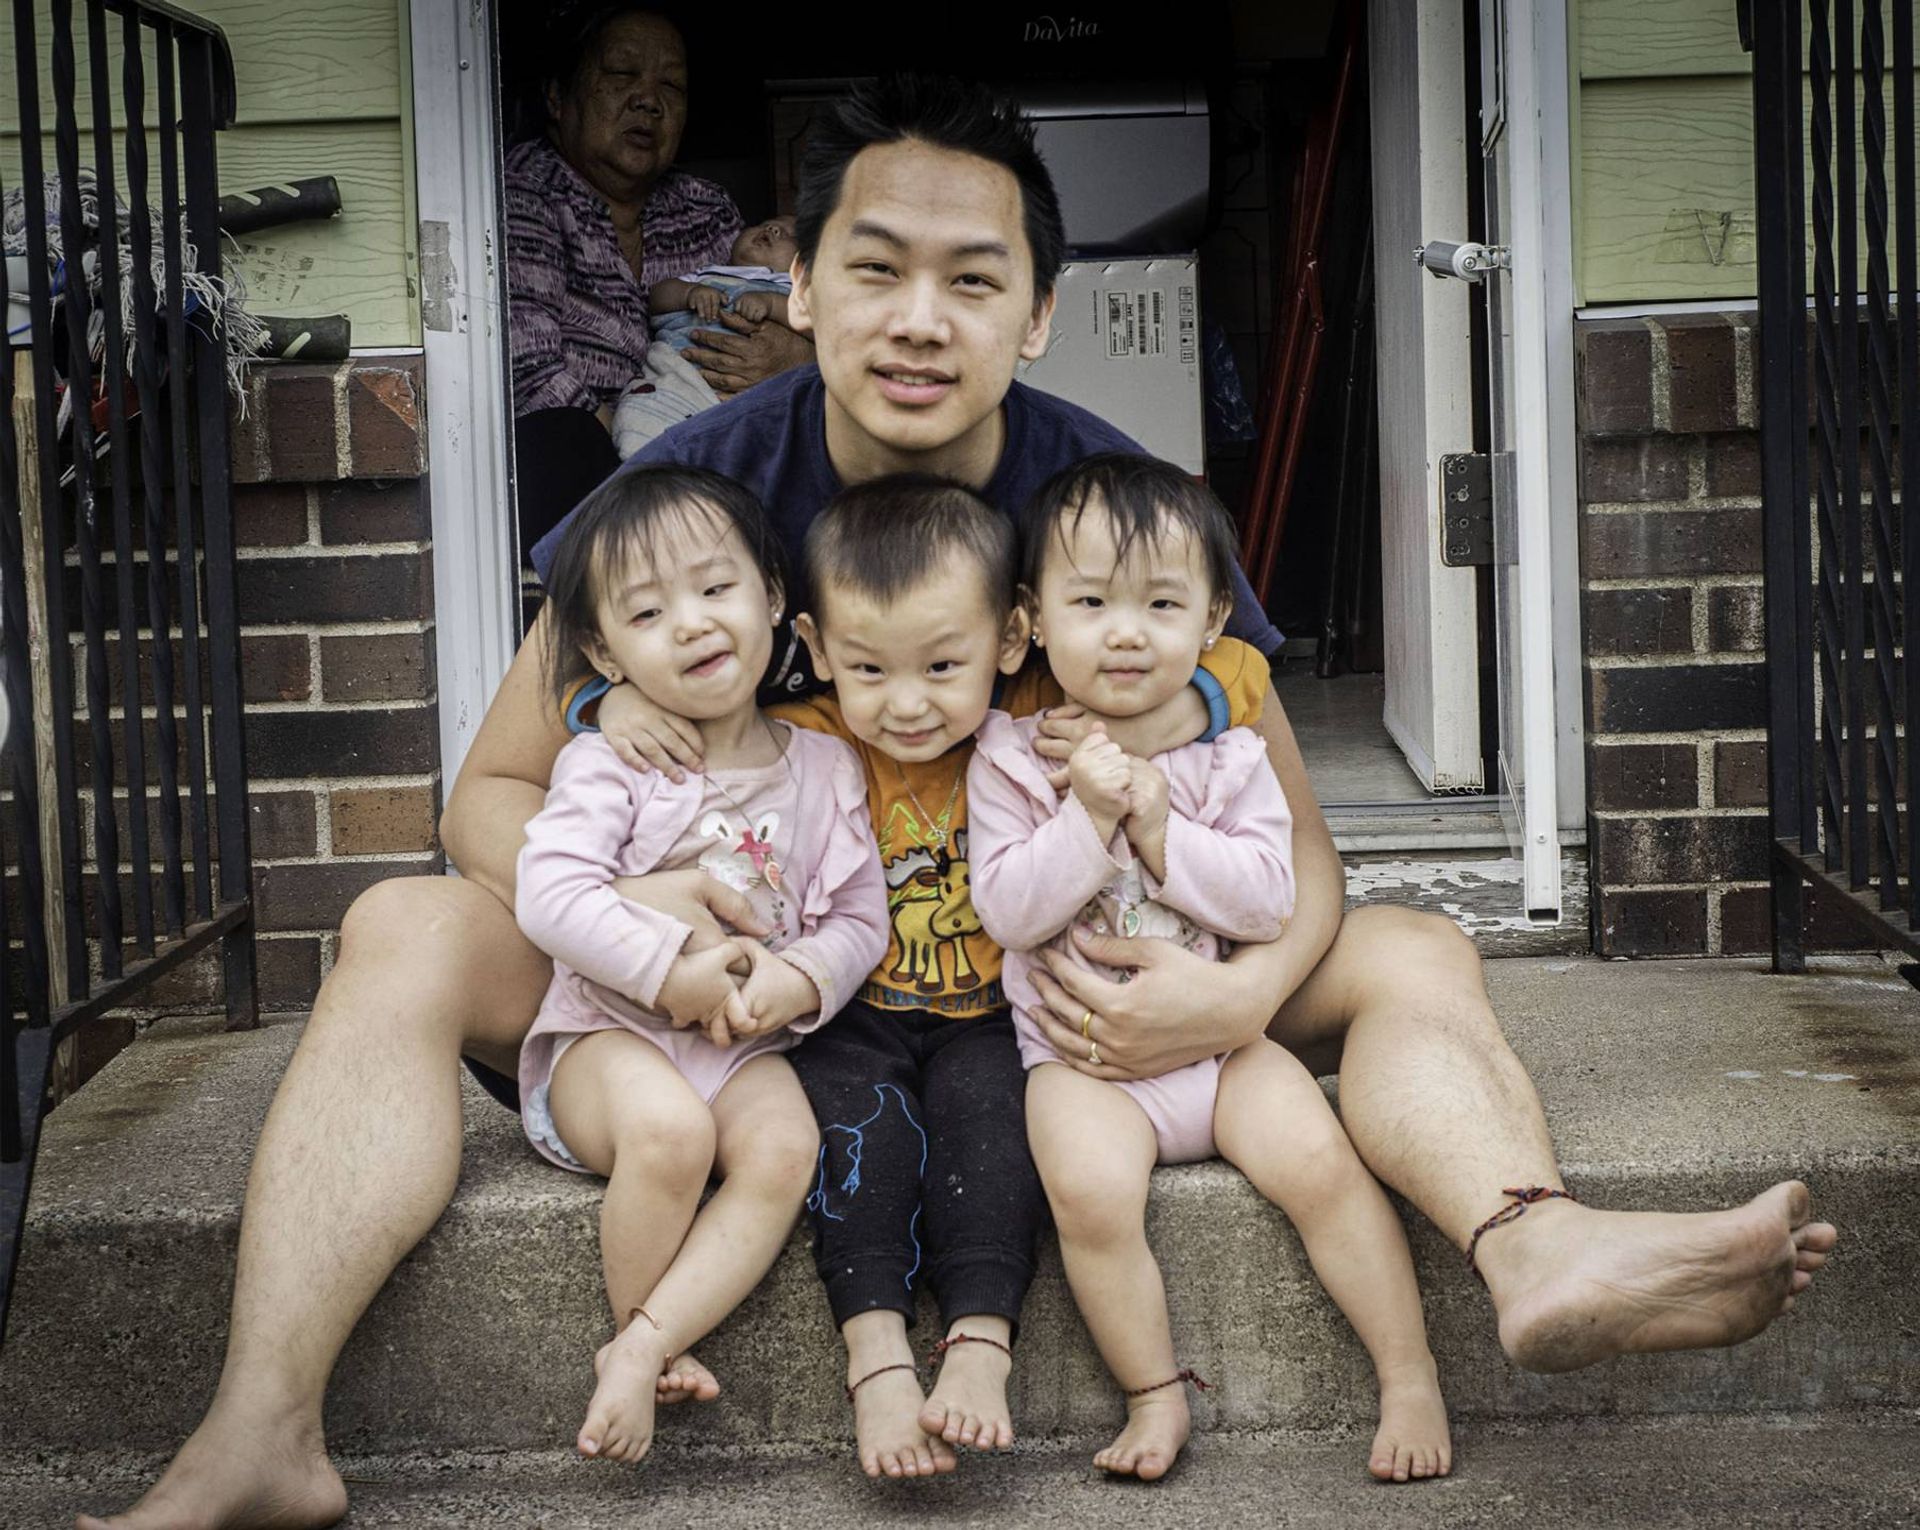 Photo of a father and three young children on steps